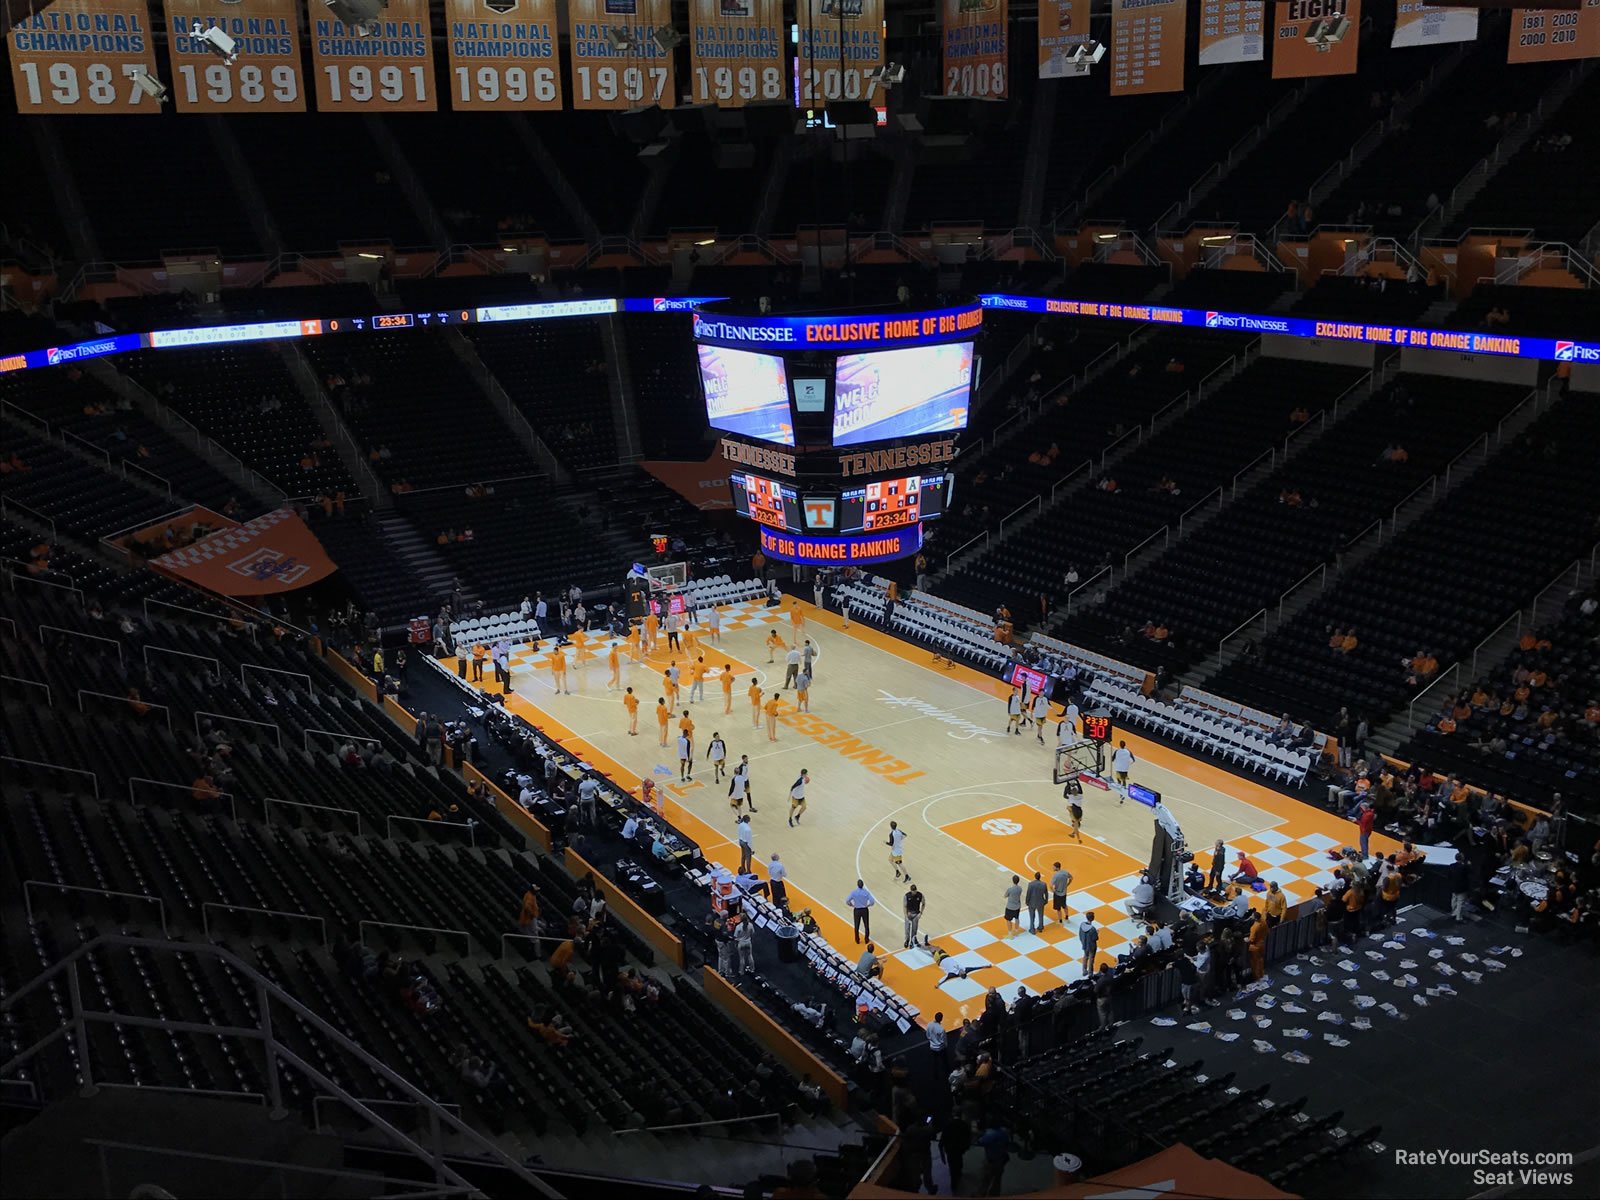 section 300, row 7 seat view  - thompson-boling arena